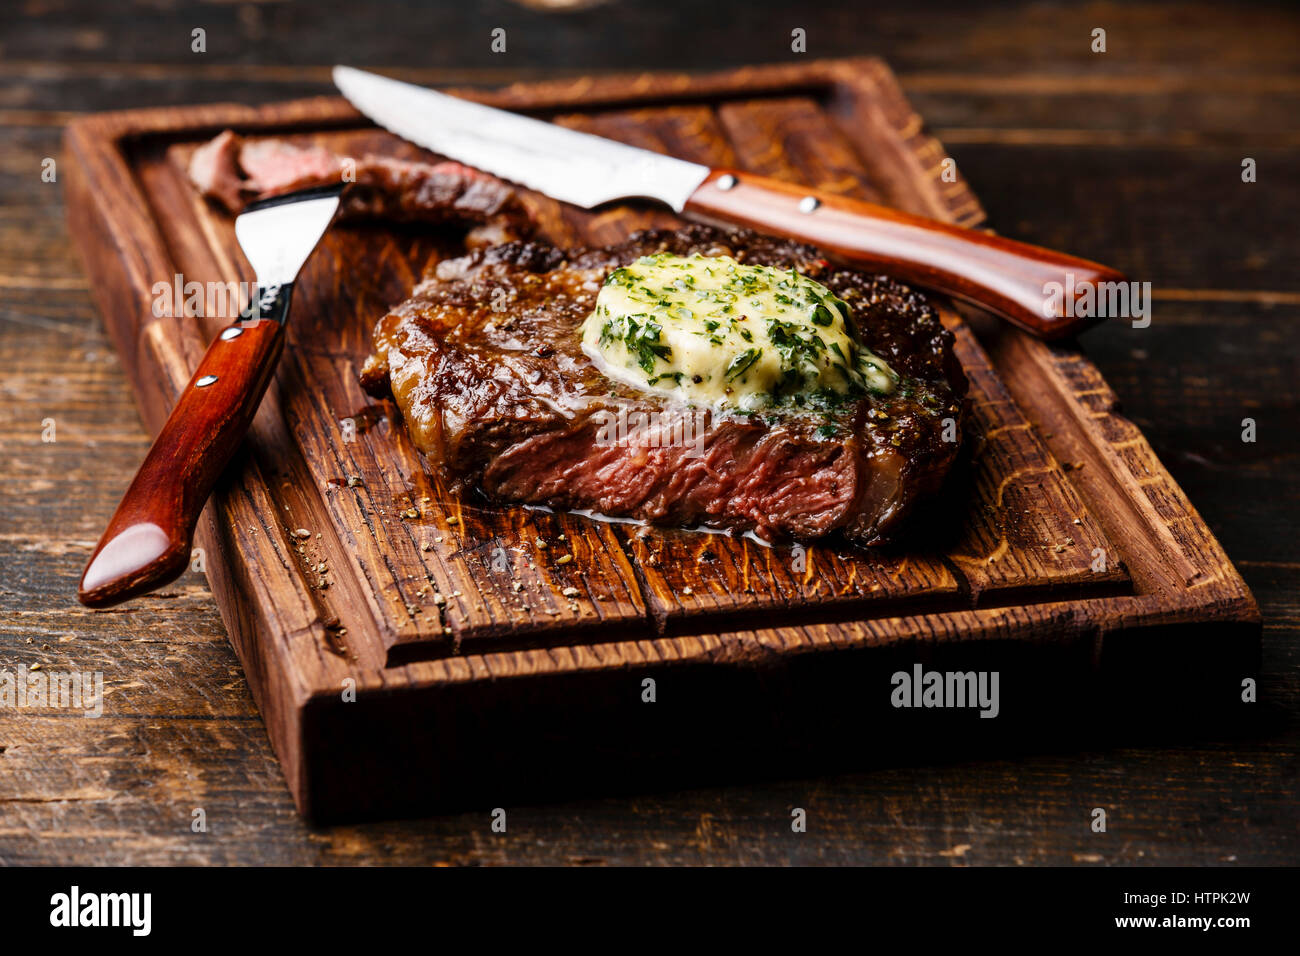 Grilled Medium rare steak Ribeye with herb butter on cutting board serving size Stock Photo